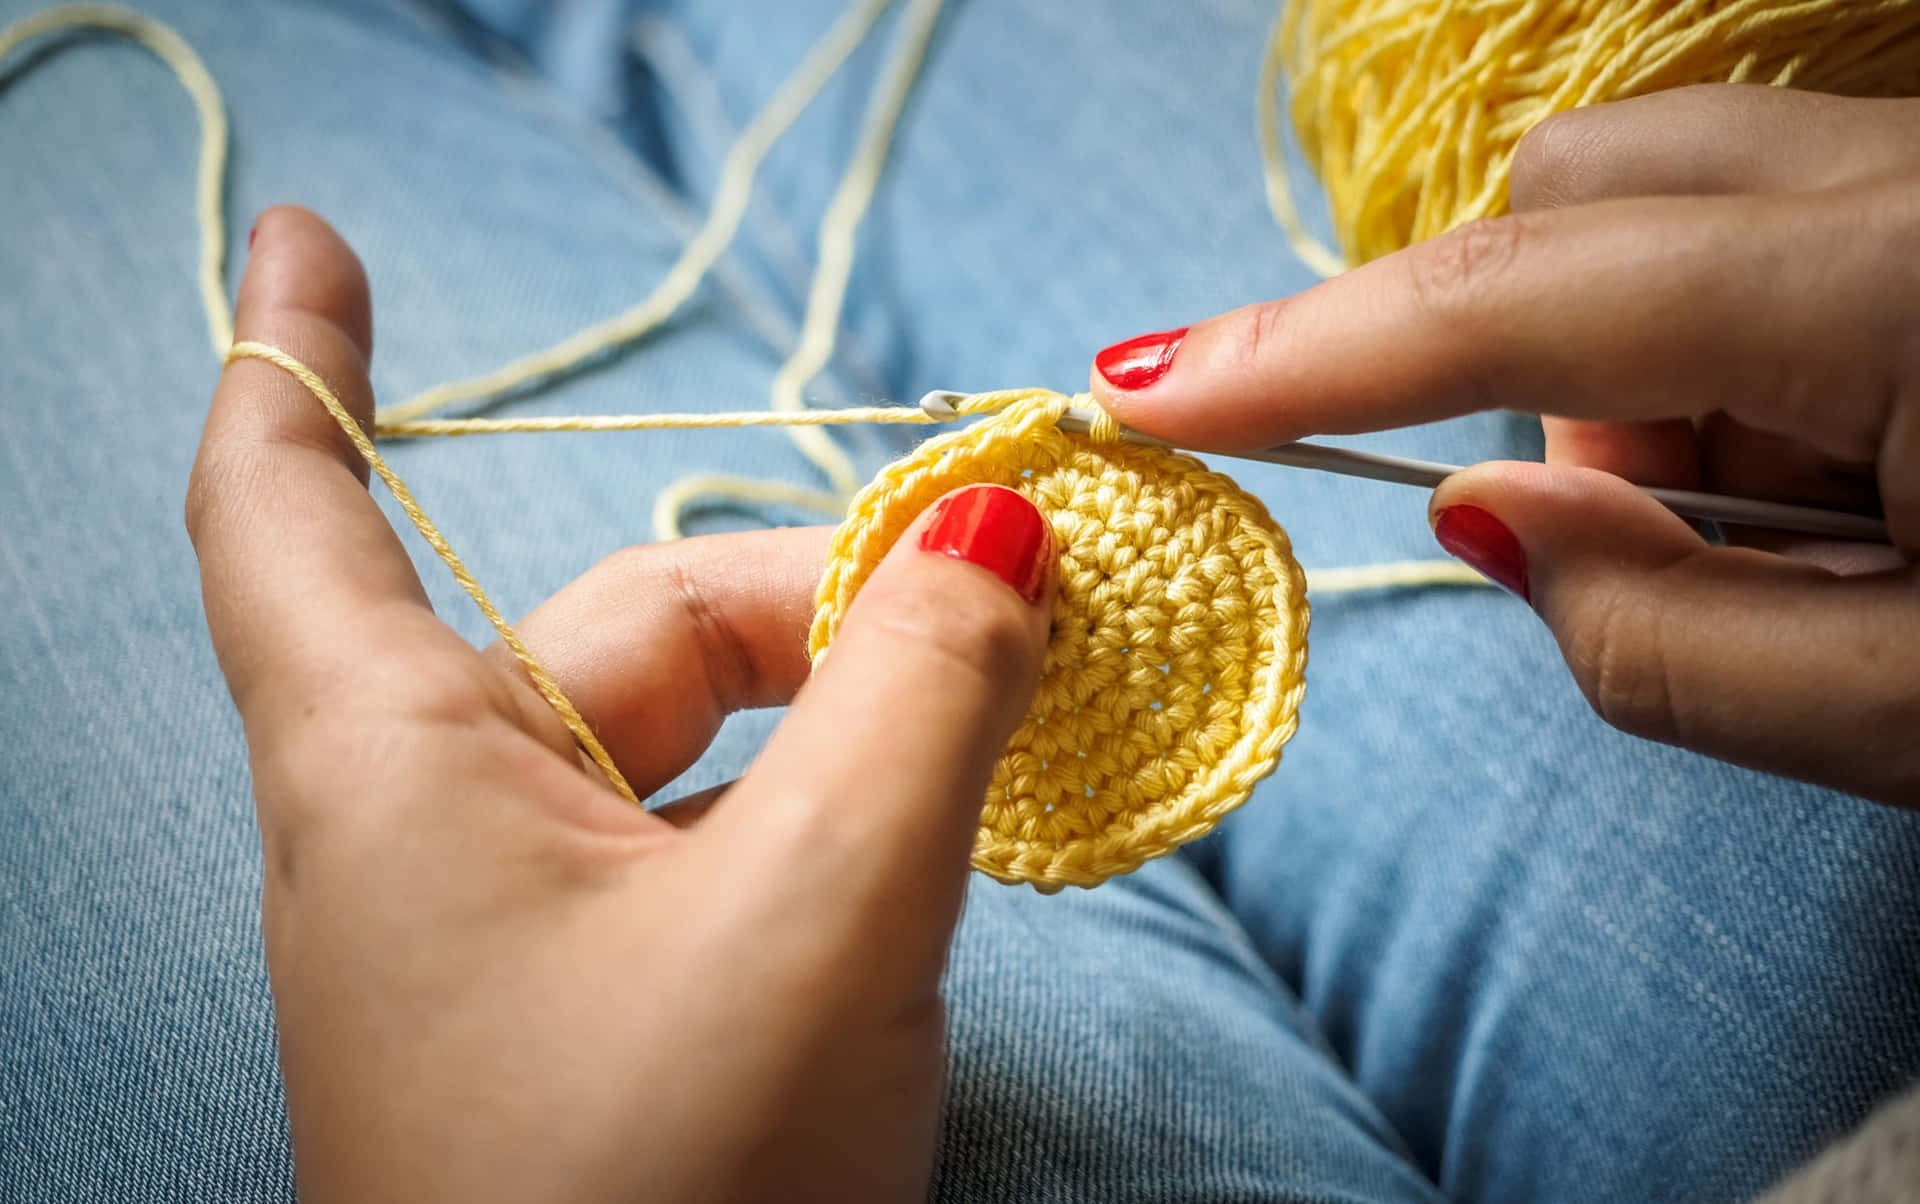 A Person Is Knitting A Yellow Crochet Ball